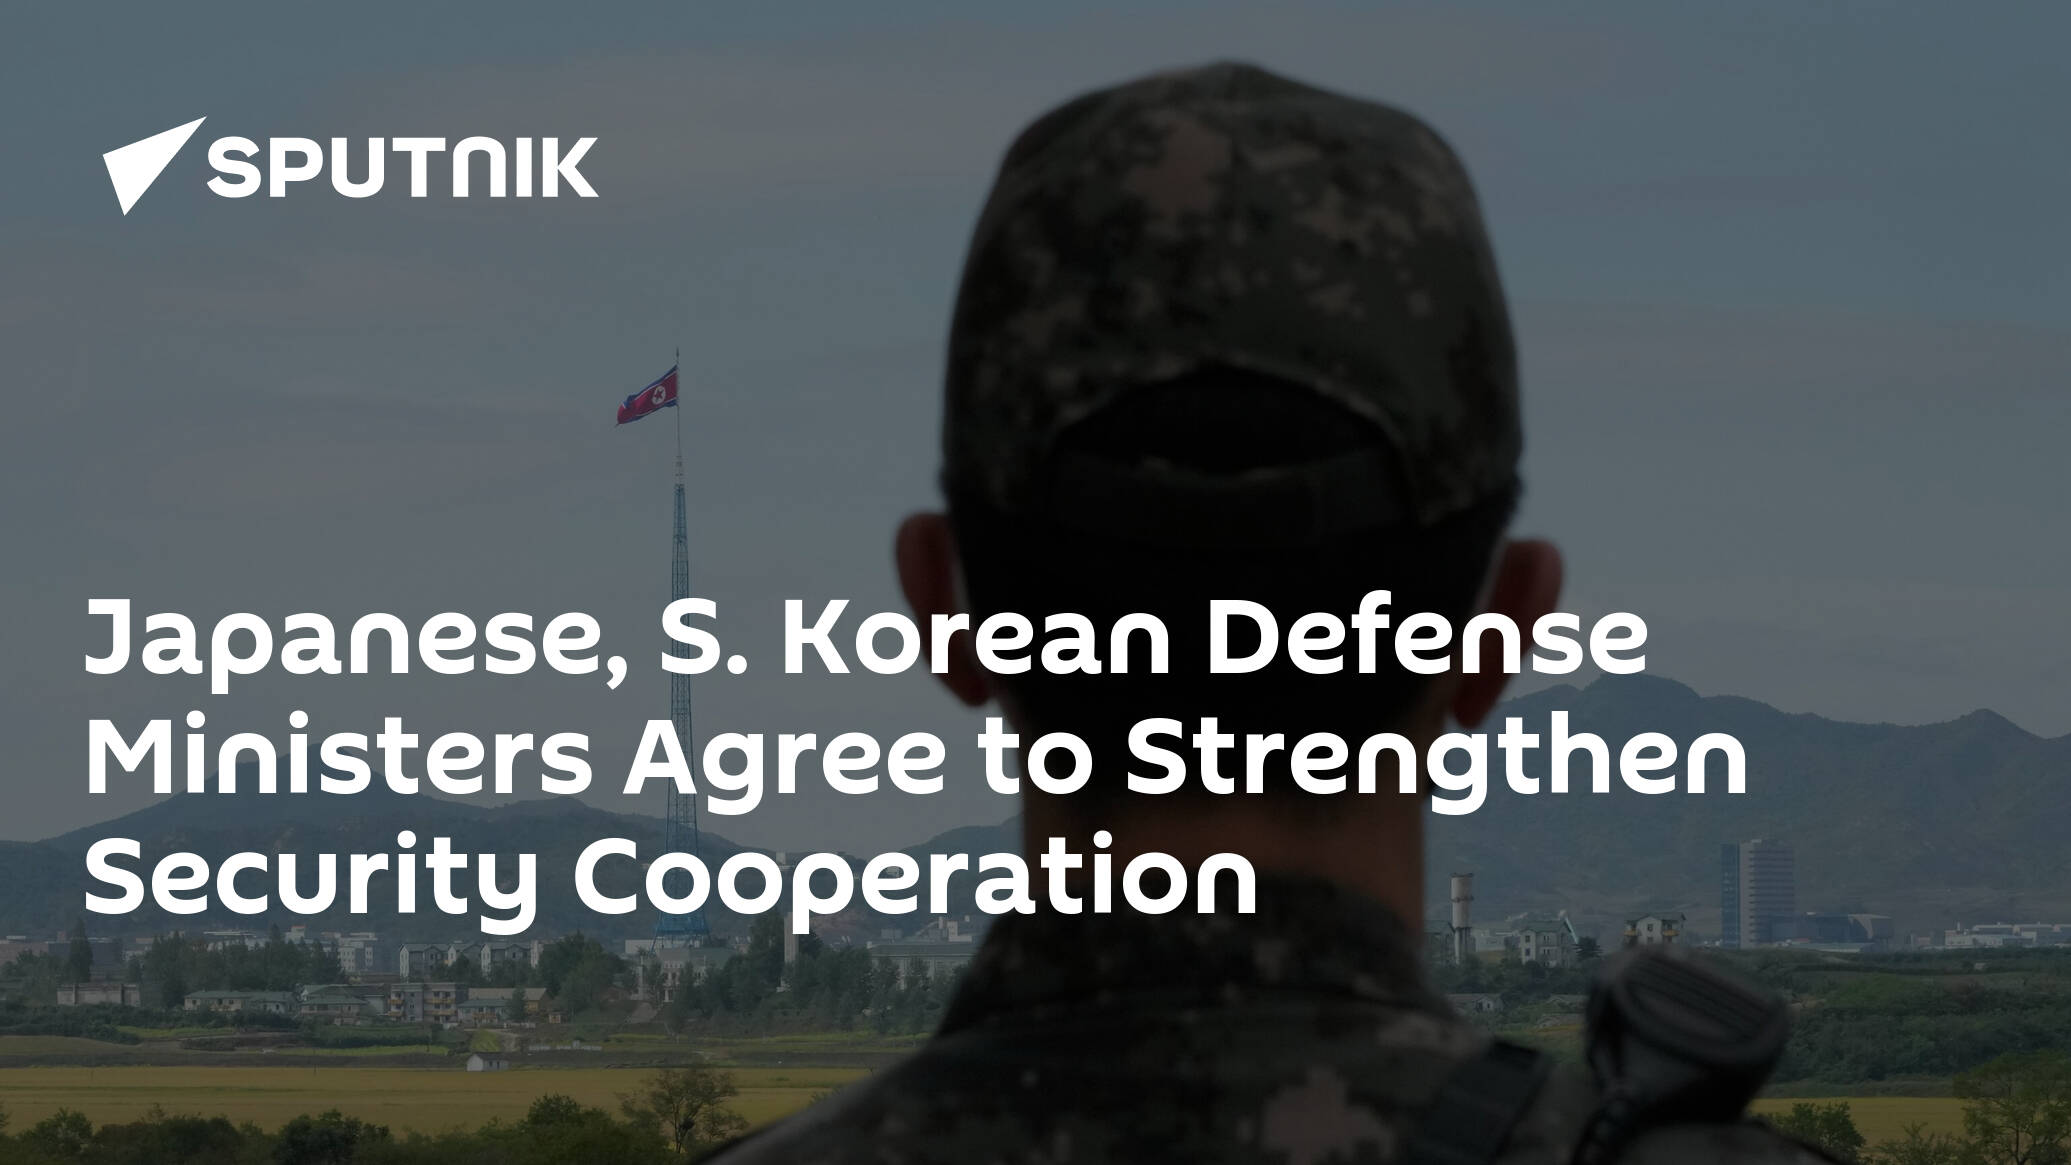 Japanese, S. Korean Defense Ministers Agree to Strengthen Security Cooperation